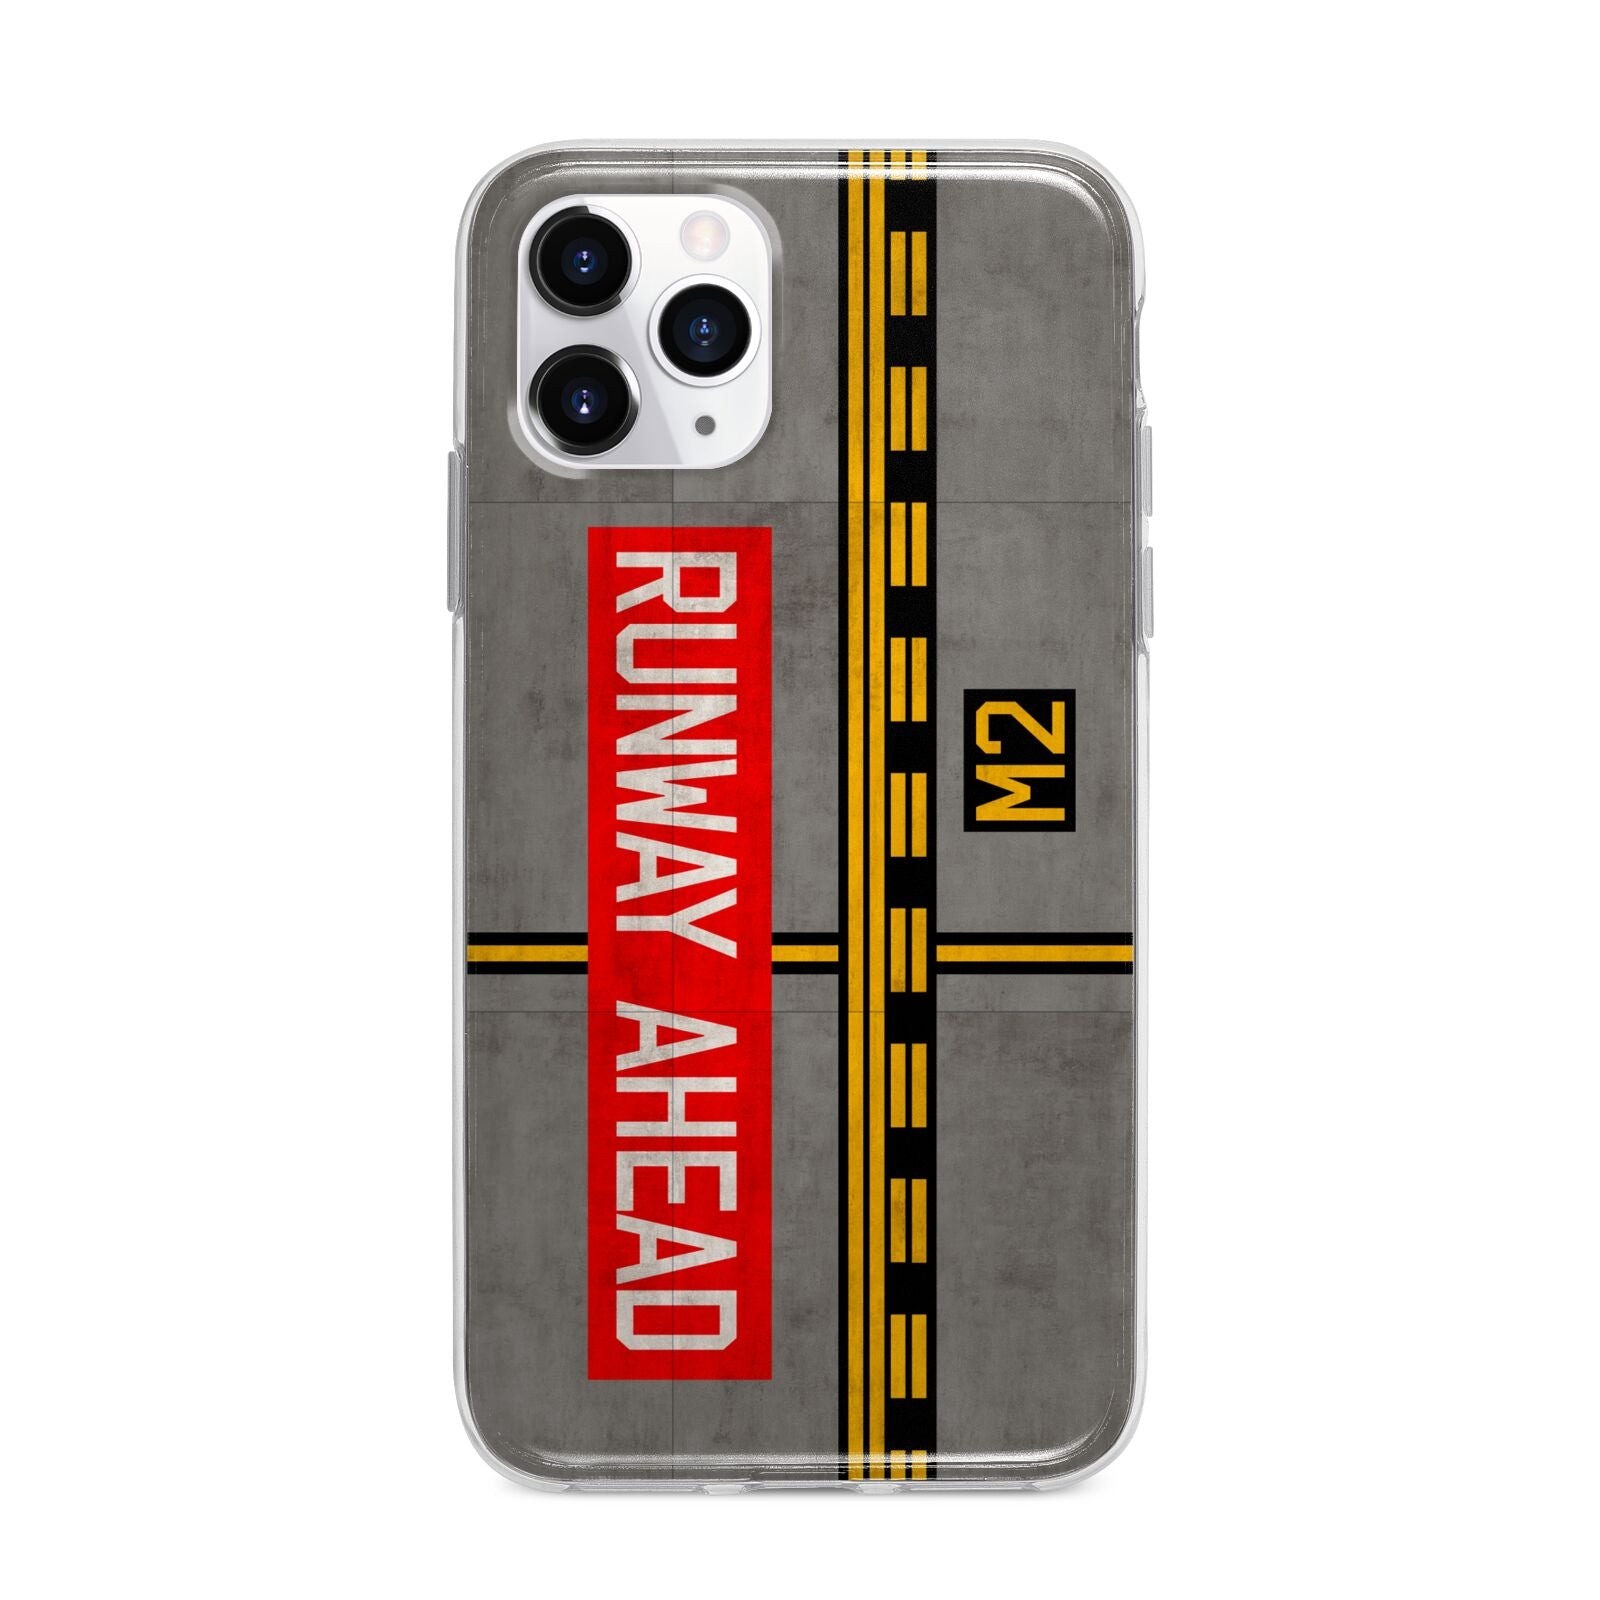 Runway Ahead Apple iPhone 11 Pro in Silver with Bumper Case